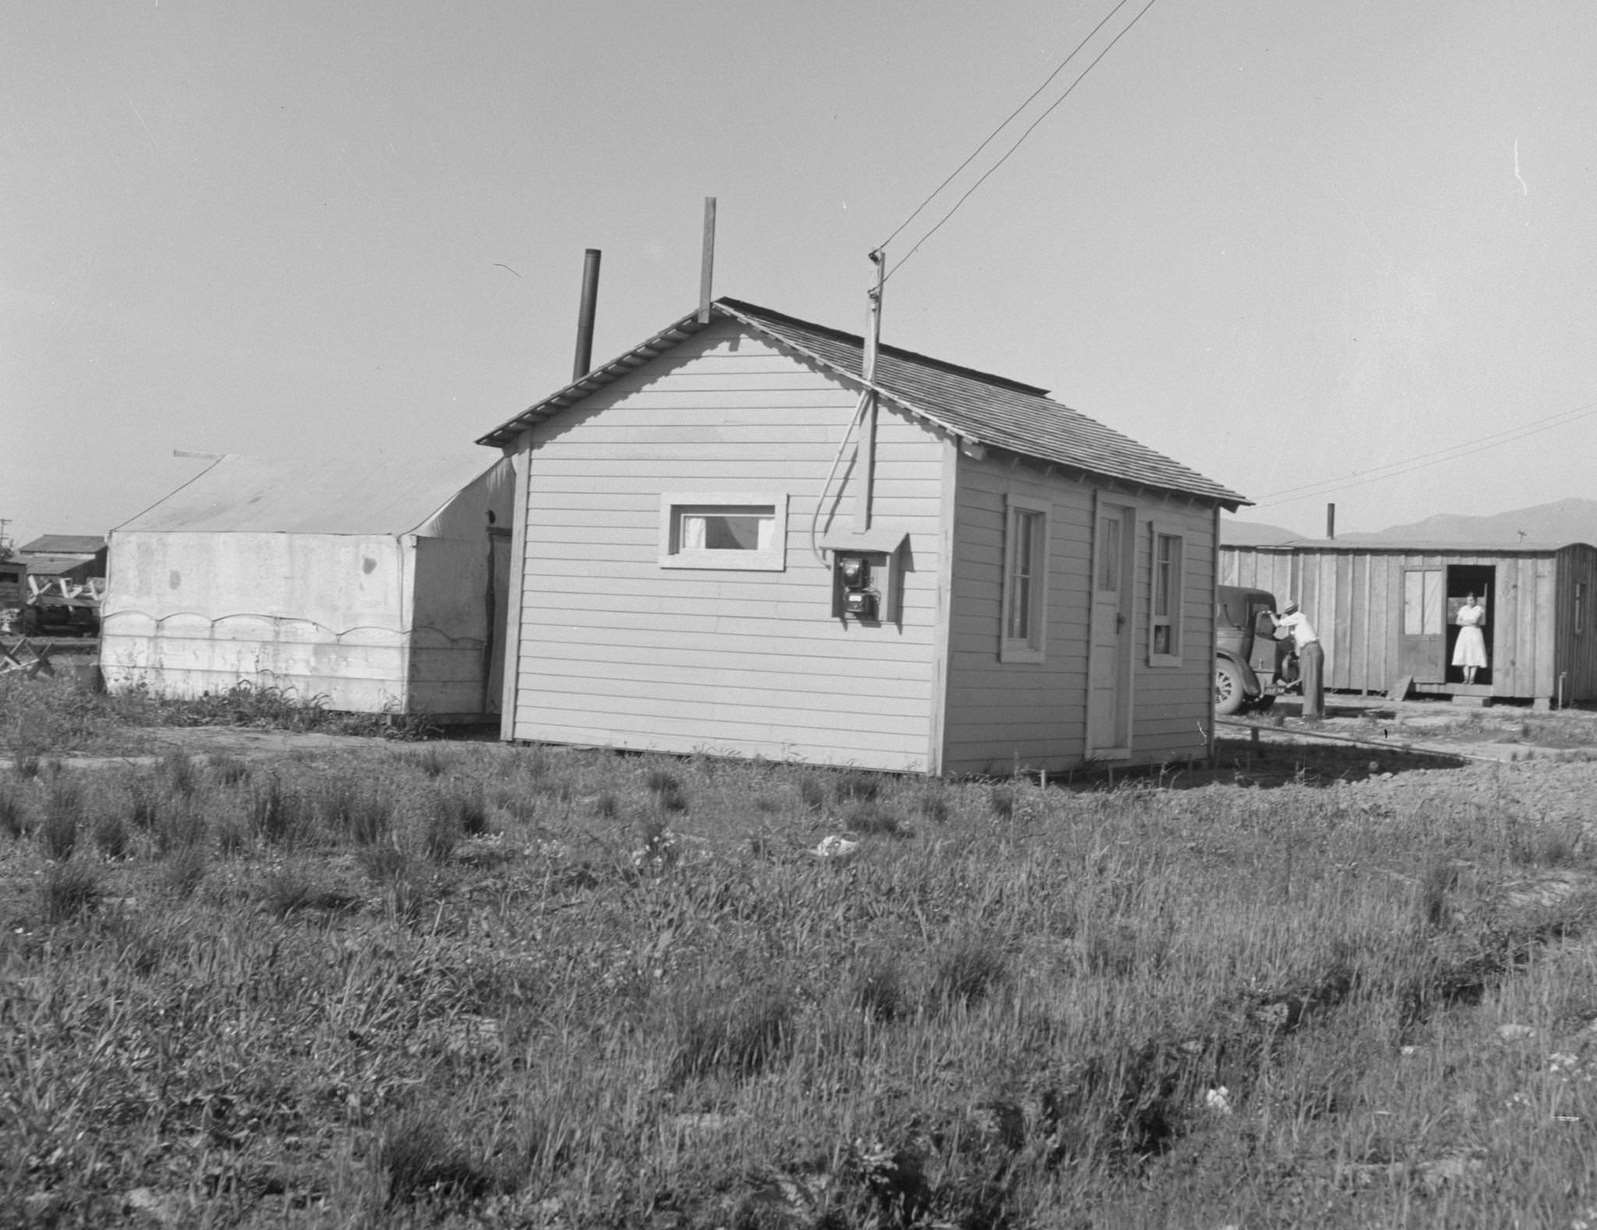 Housing for rapidly growing settlement of lettuce workers on fringes of town. Salinas, California, 1939